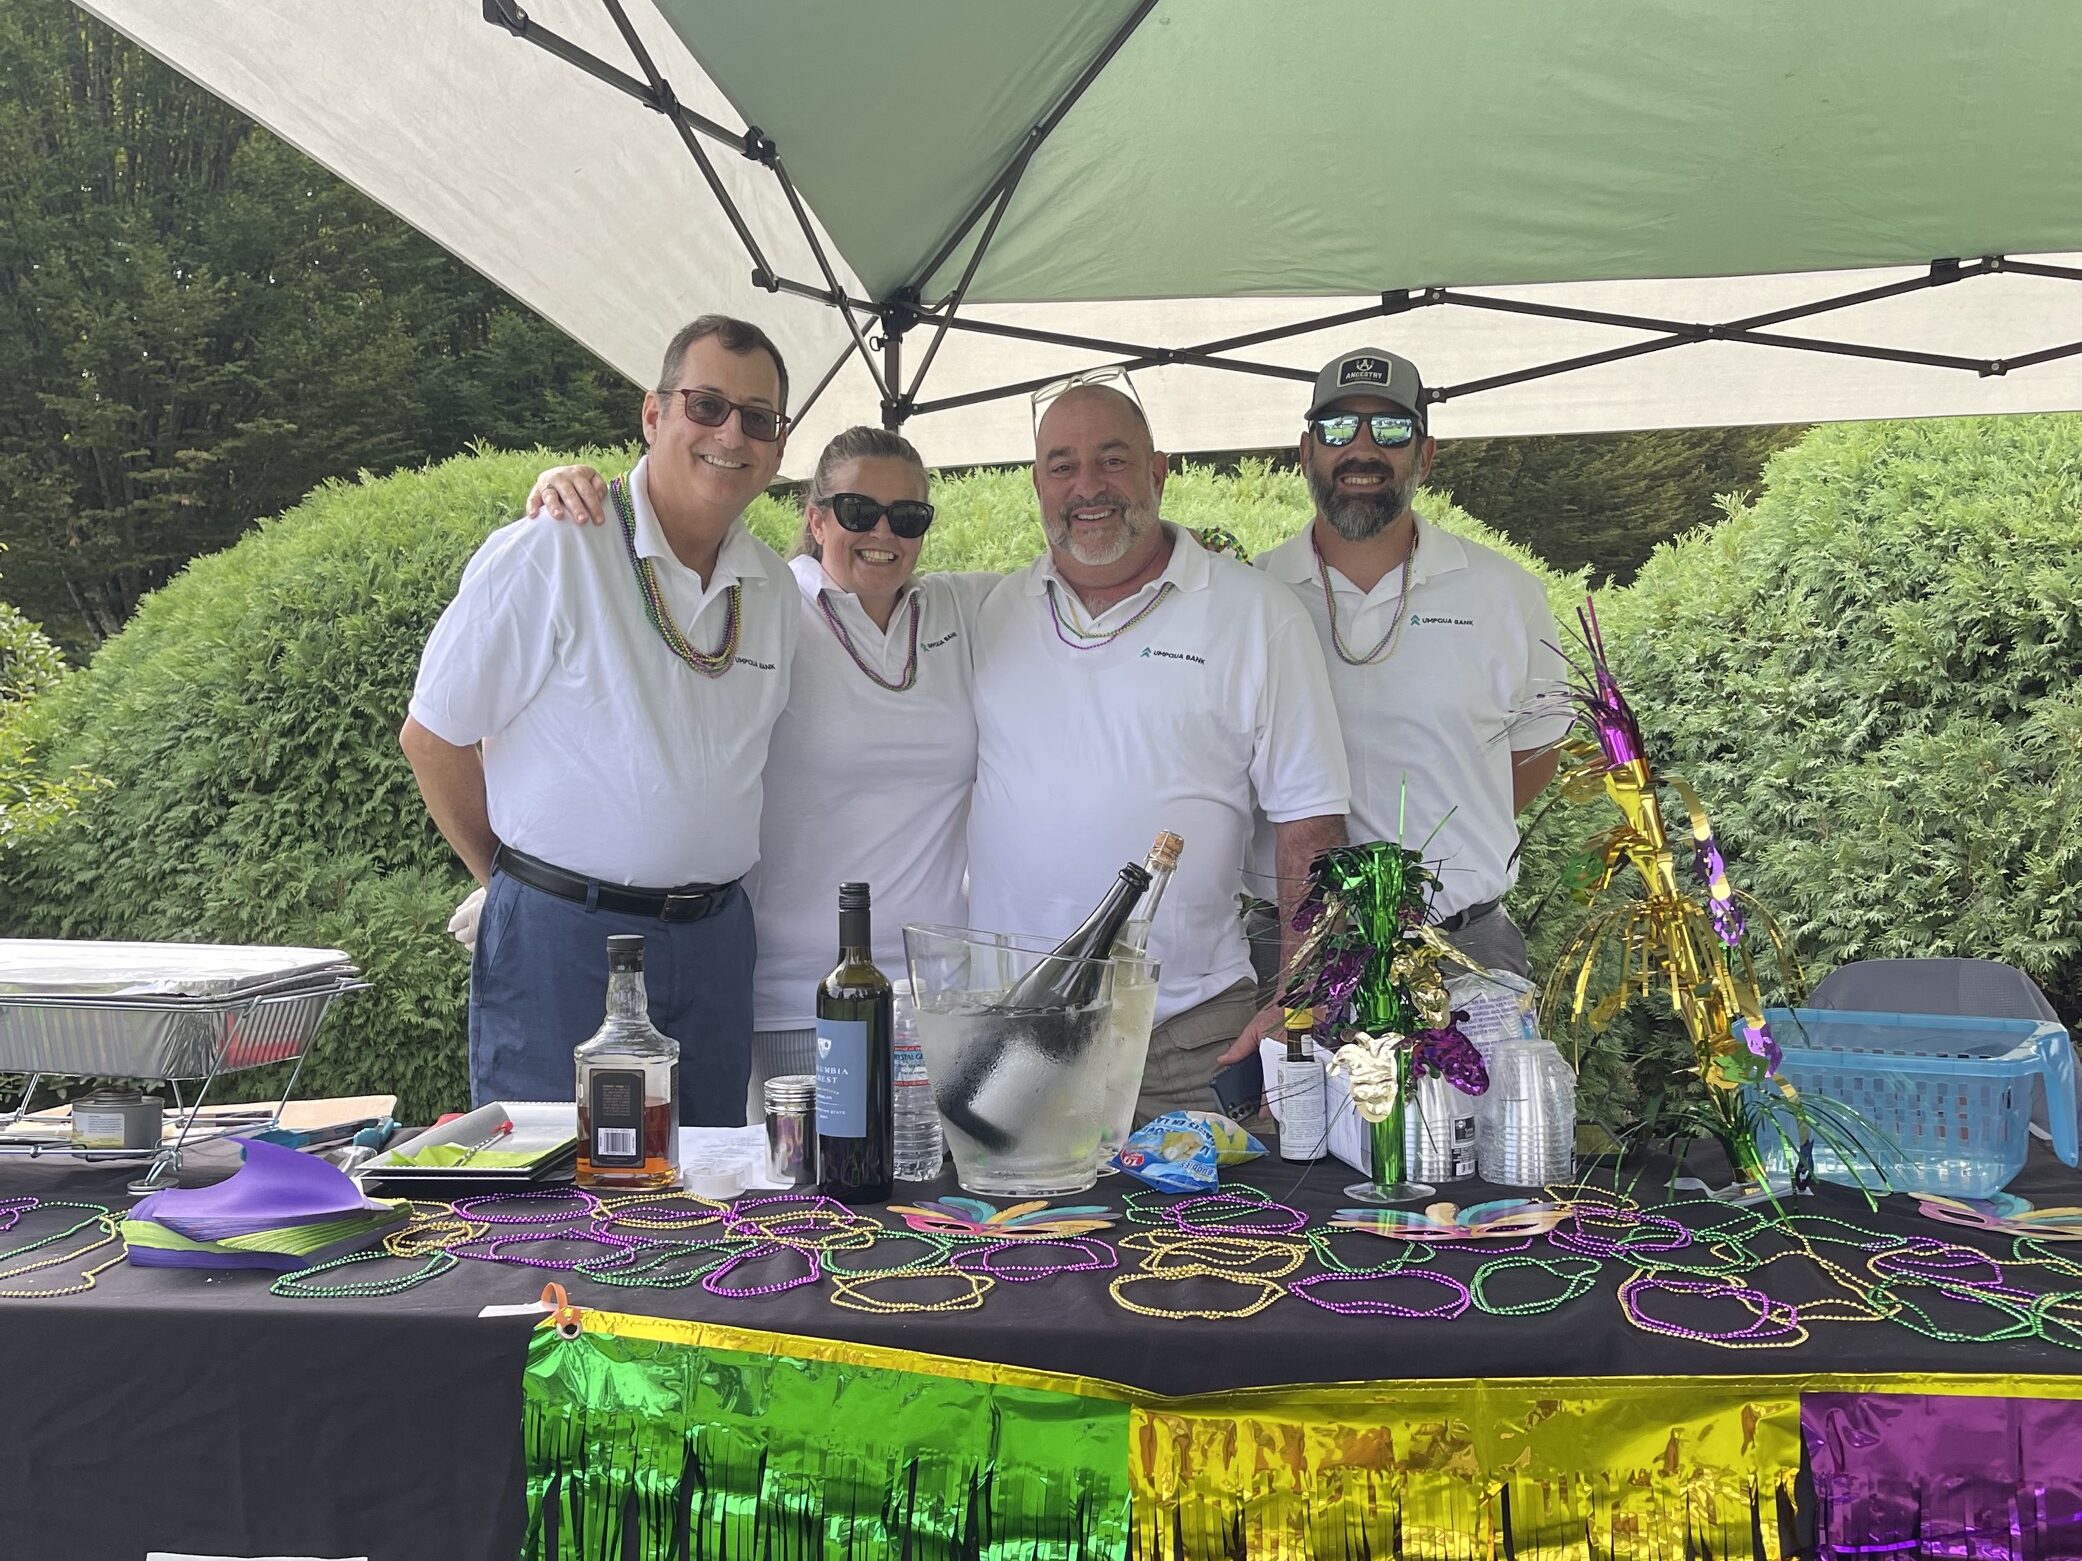 Four employees of Umpqua bank smile for a photo in front of a booth decorated for Mardi Gras